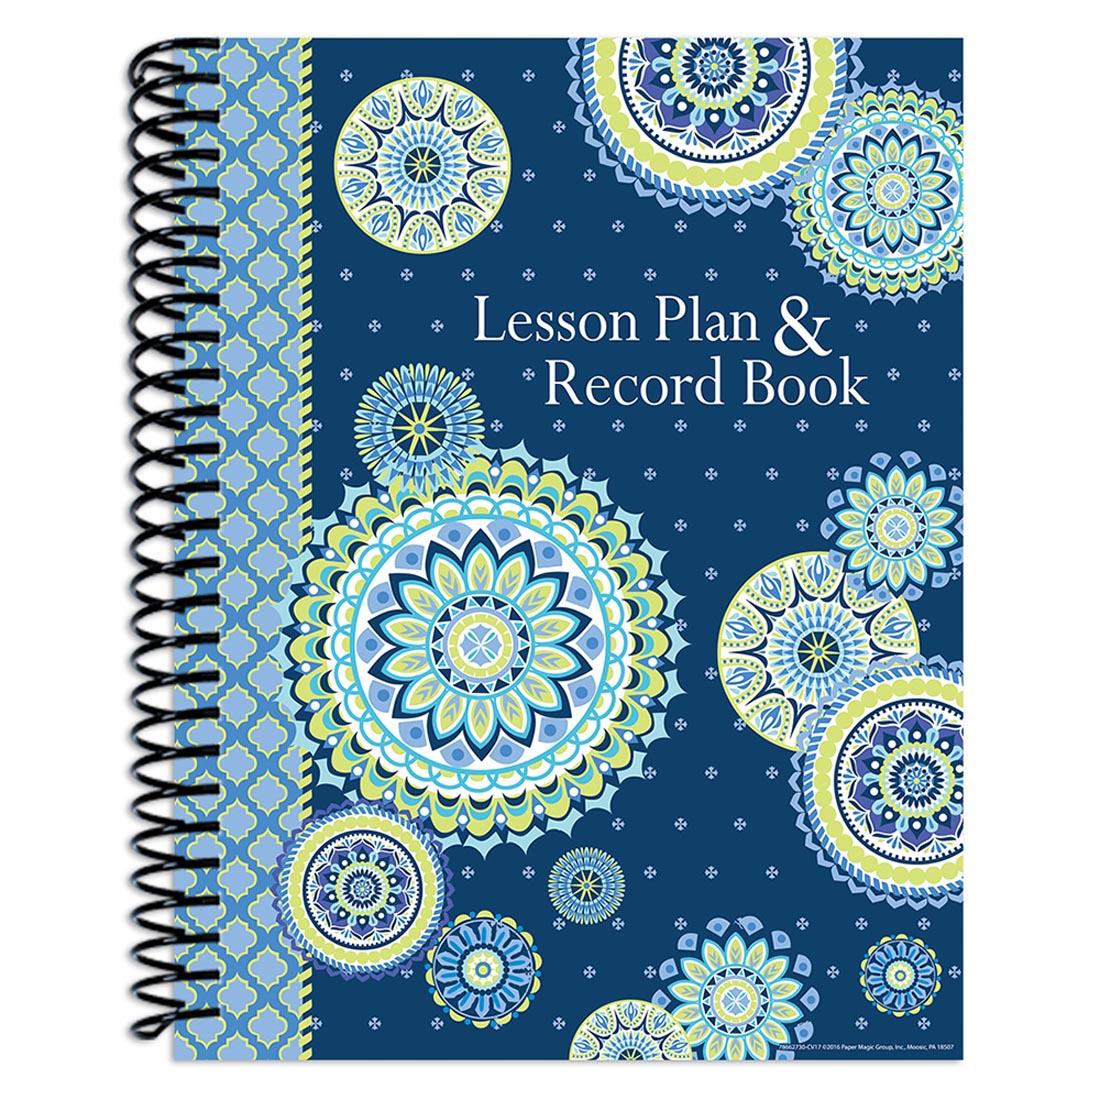 Lesson Plan & Record Book from the Blue Harmony collection by Eureka